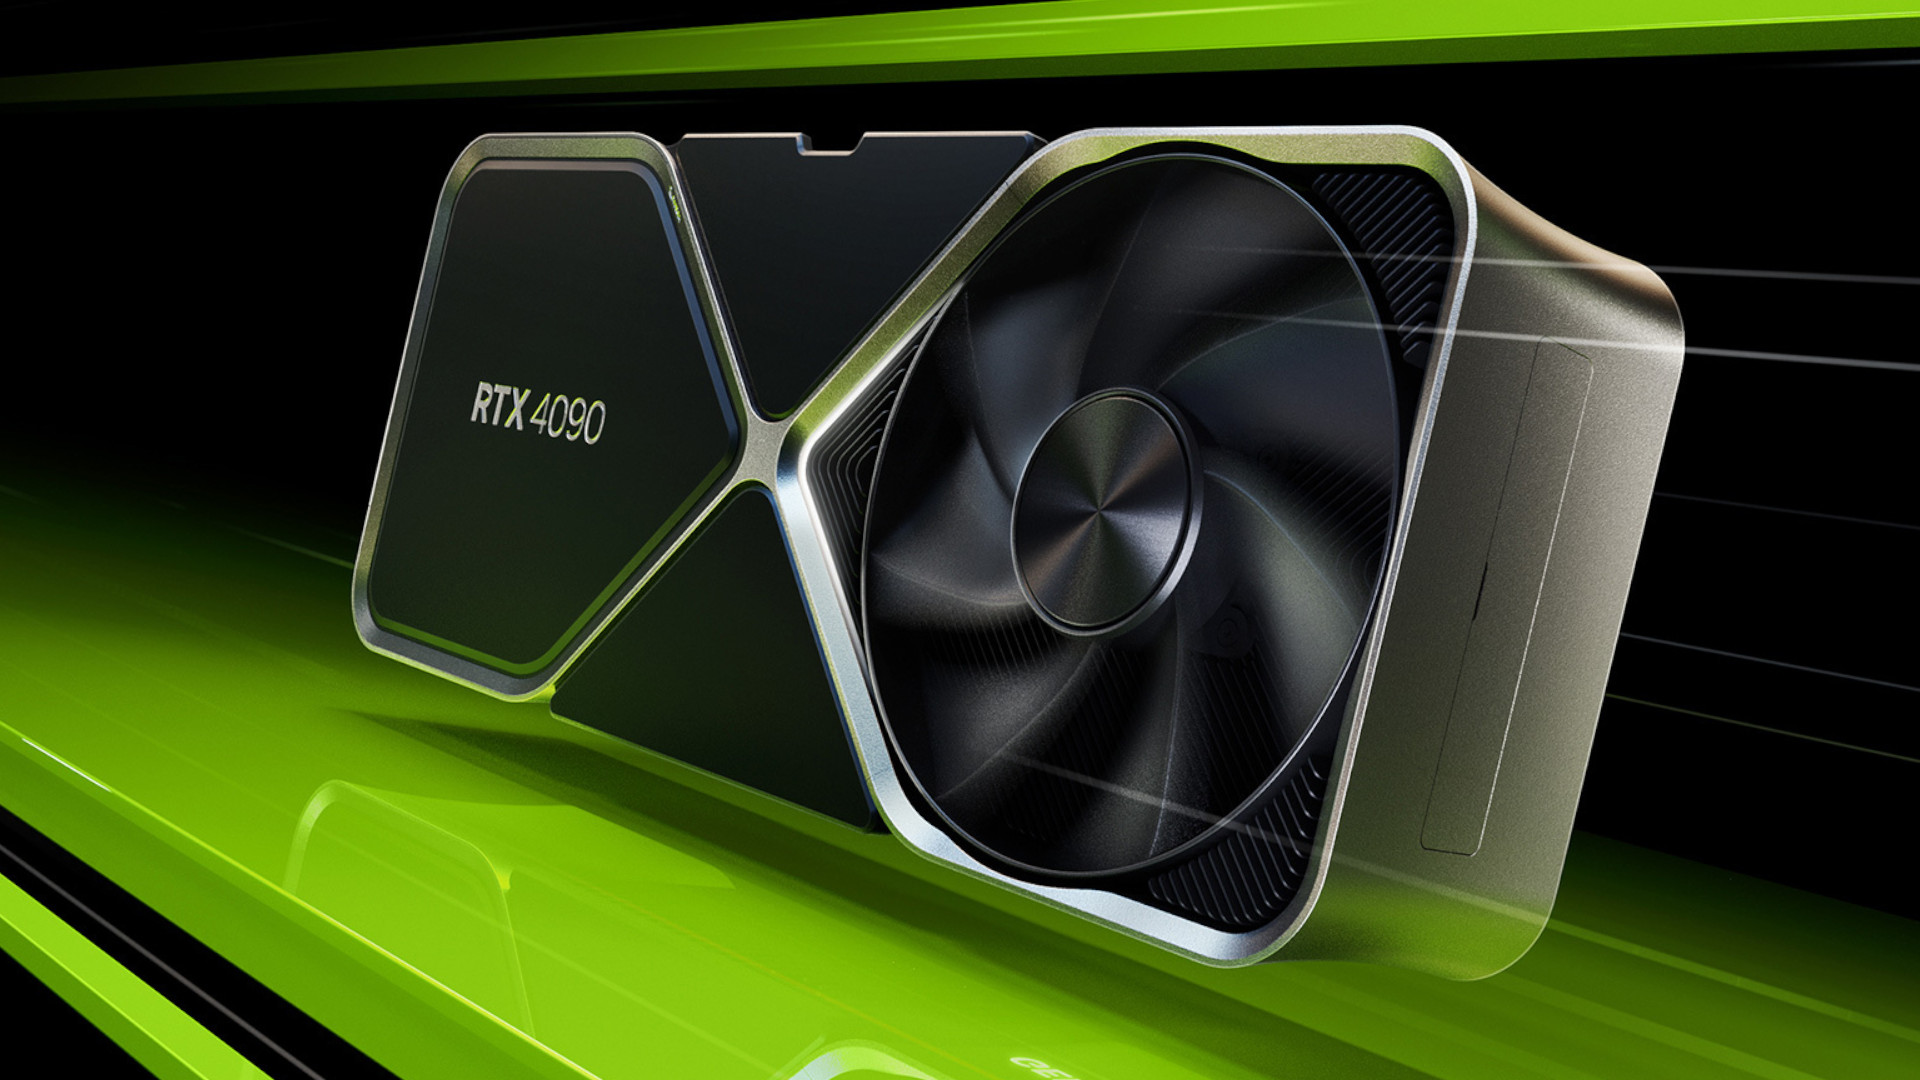 The Nvidia GeForce RTX 4090 graphics card against a black background with green streaks